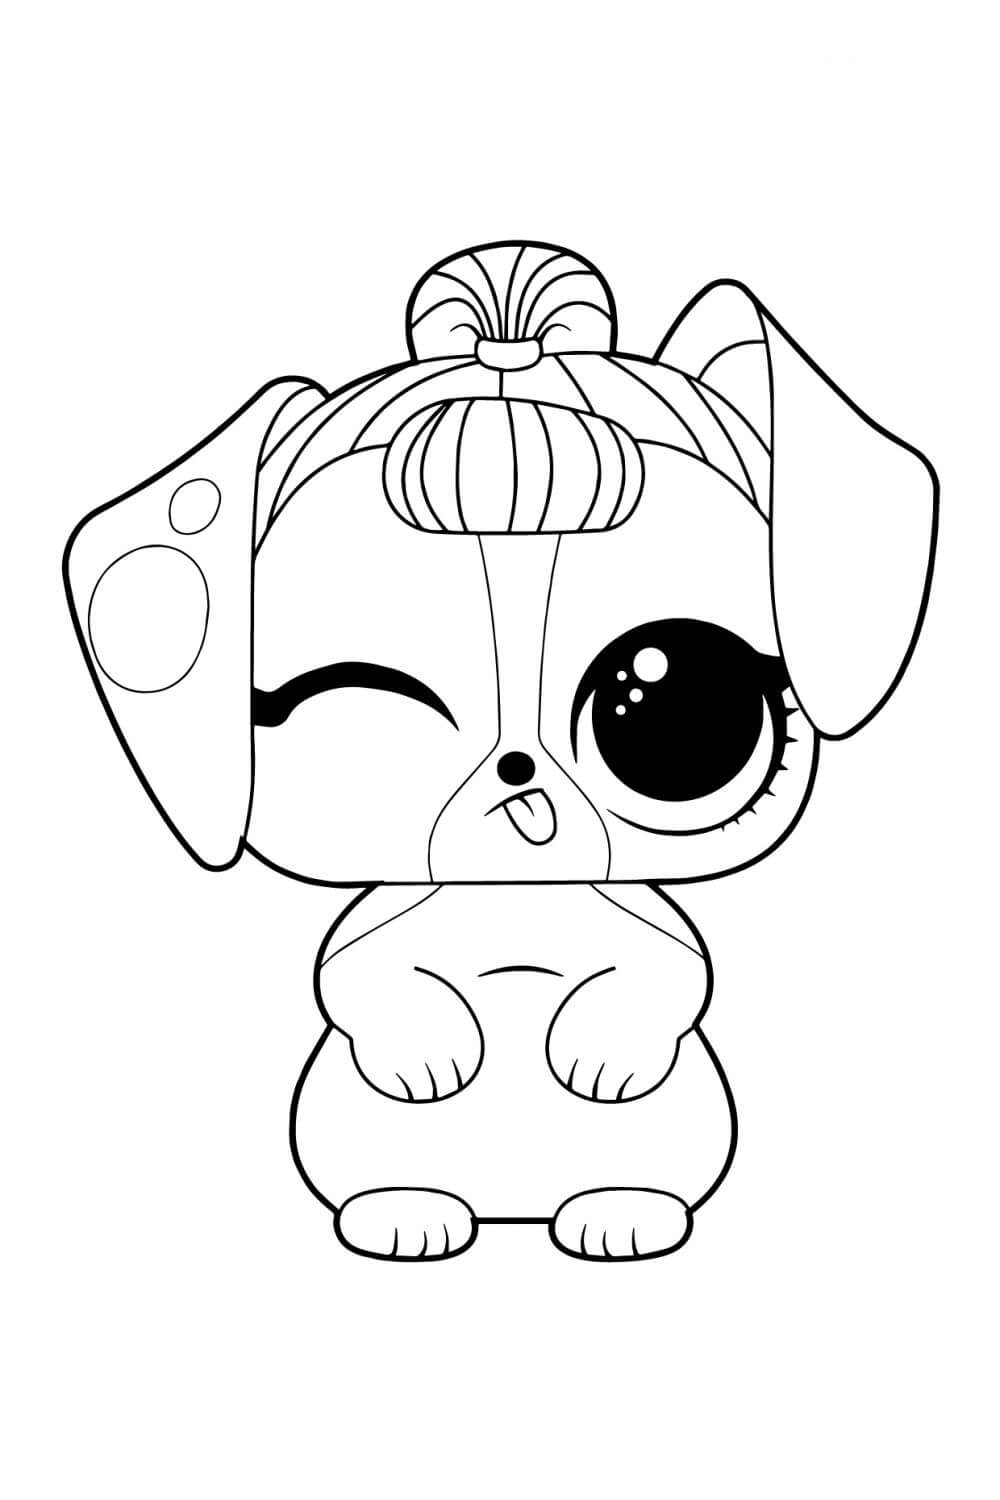 lol pet puppy cute coloring page free printable coloring pages for kids